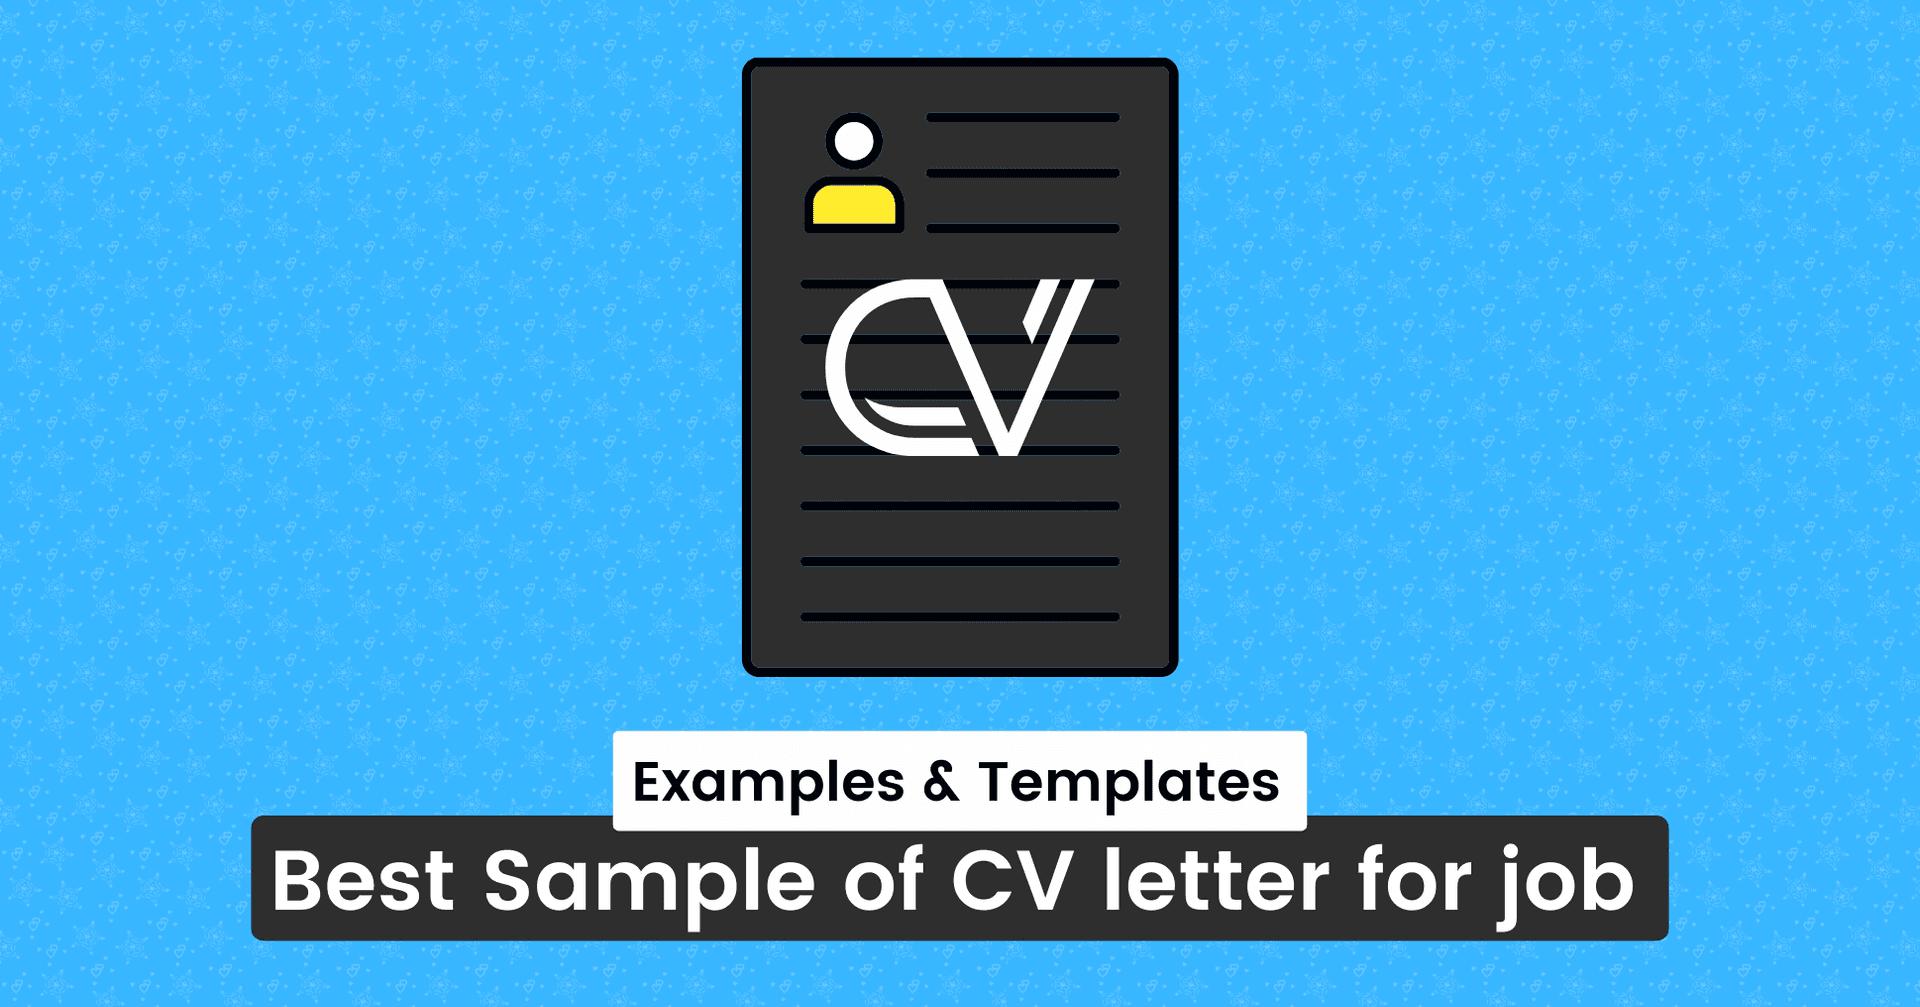 Best sample of CV letter for job: Examples for Job Seekers in 2023